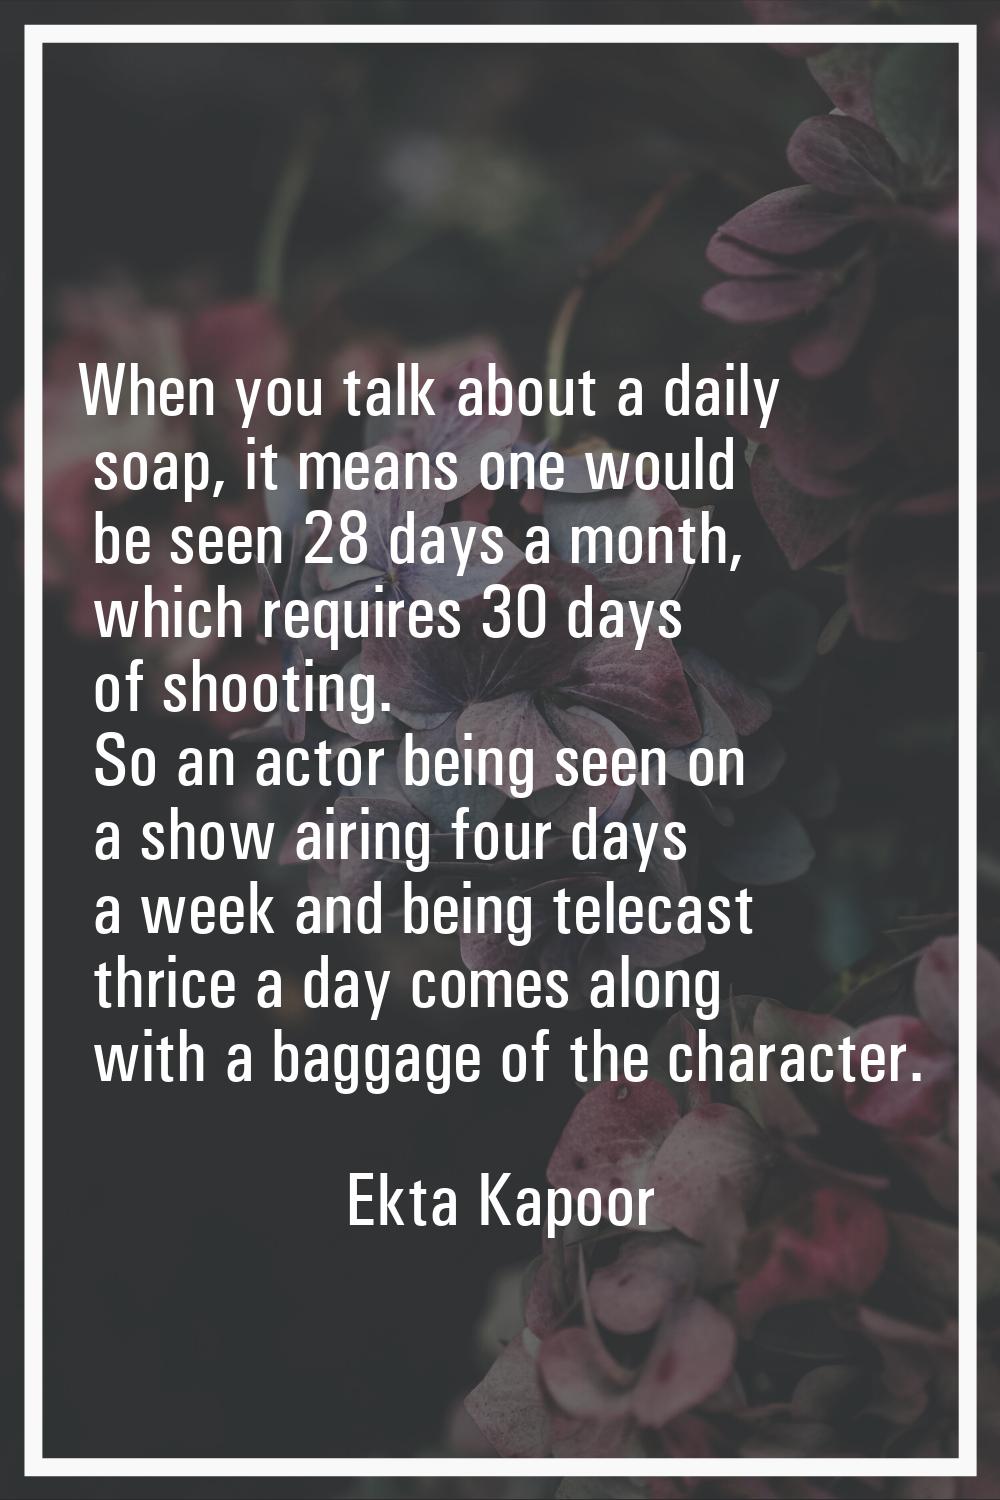 When you talk about a daily soap, it means one would be seen 28 days a month, which requires 30 day